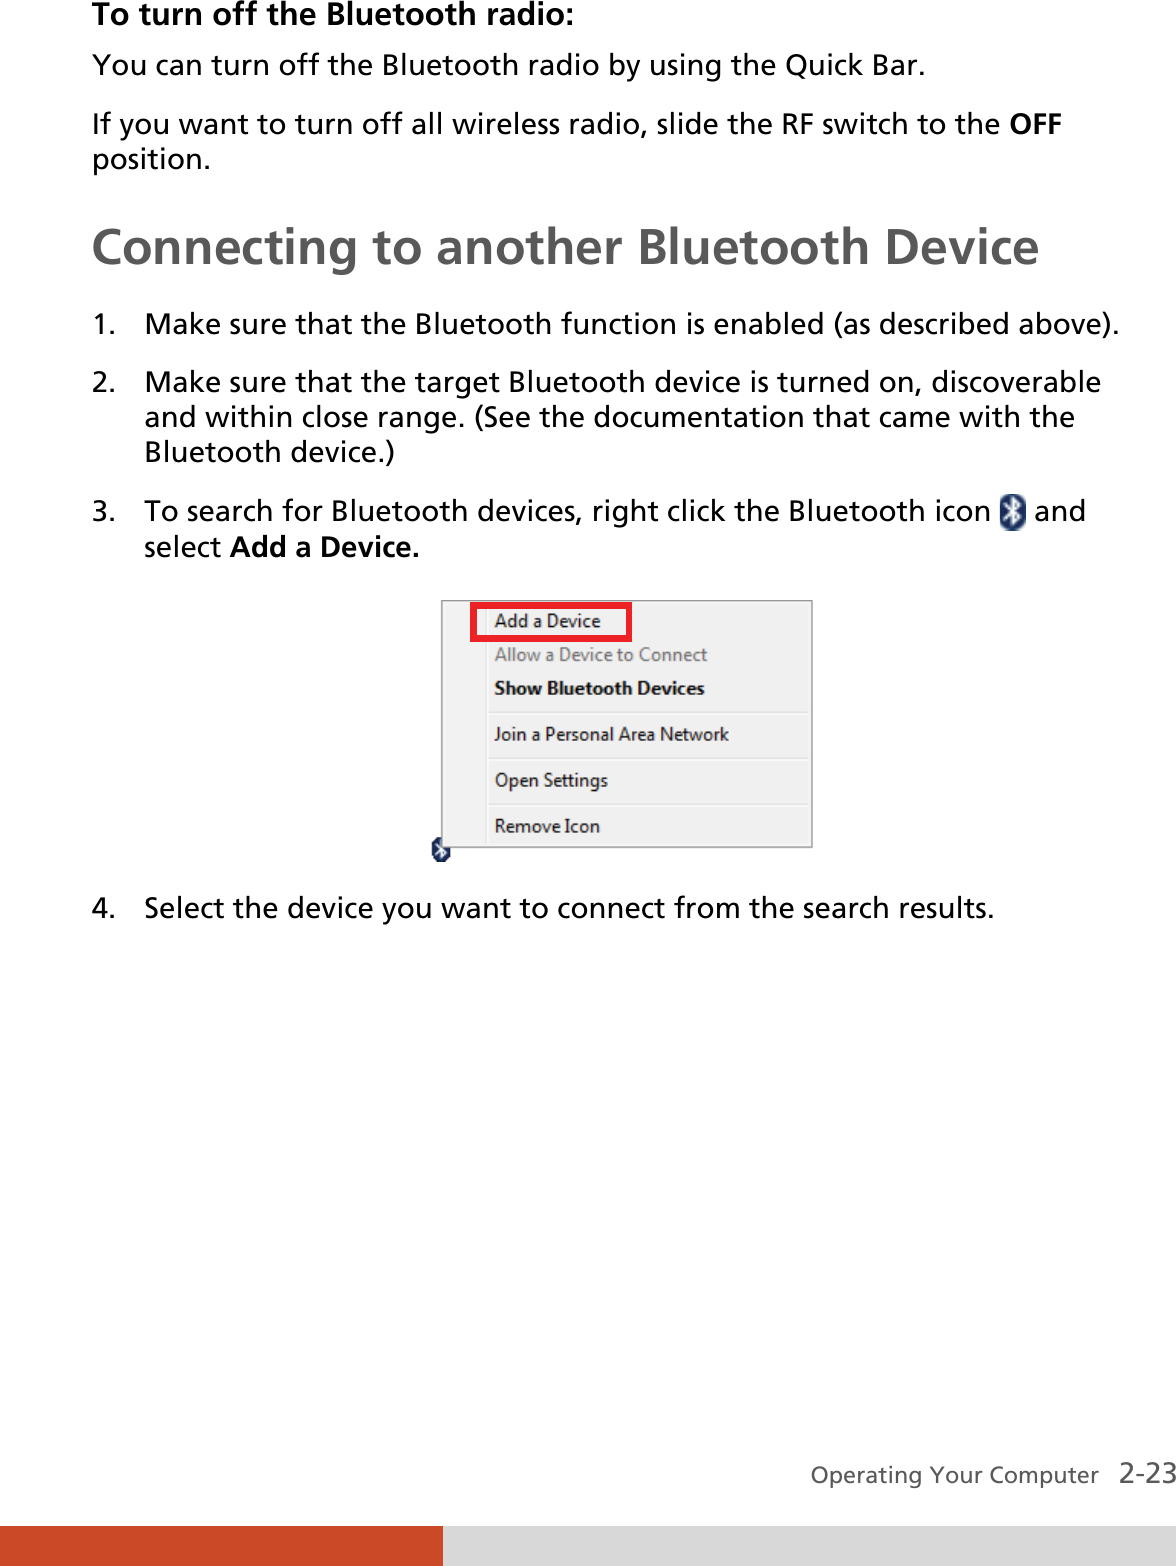  Operating Your Computer   2-23 To turn off the Bluetooth radio: You can turn off the Bluetooth radio by using the Quick Bar. If you want to turn off all wireless radio, slide the RF switch to the OFF position. Connecting to another Bluetooth Device 1. Make sure that the Bluetooth function is enabled (as described above). 2. Make sure that the target Bluetooth device is turned on, discoverable and within close range. (See the documentation that came with the Bluetooth device.) 3. To search for Bluetooth devices, right click the Bluetooth icon   and select Add a Device.  4. Select the device you want to connect from the search results. 